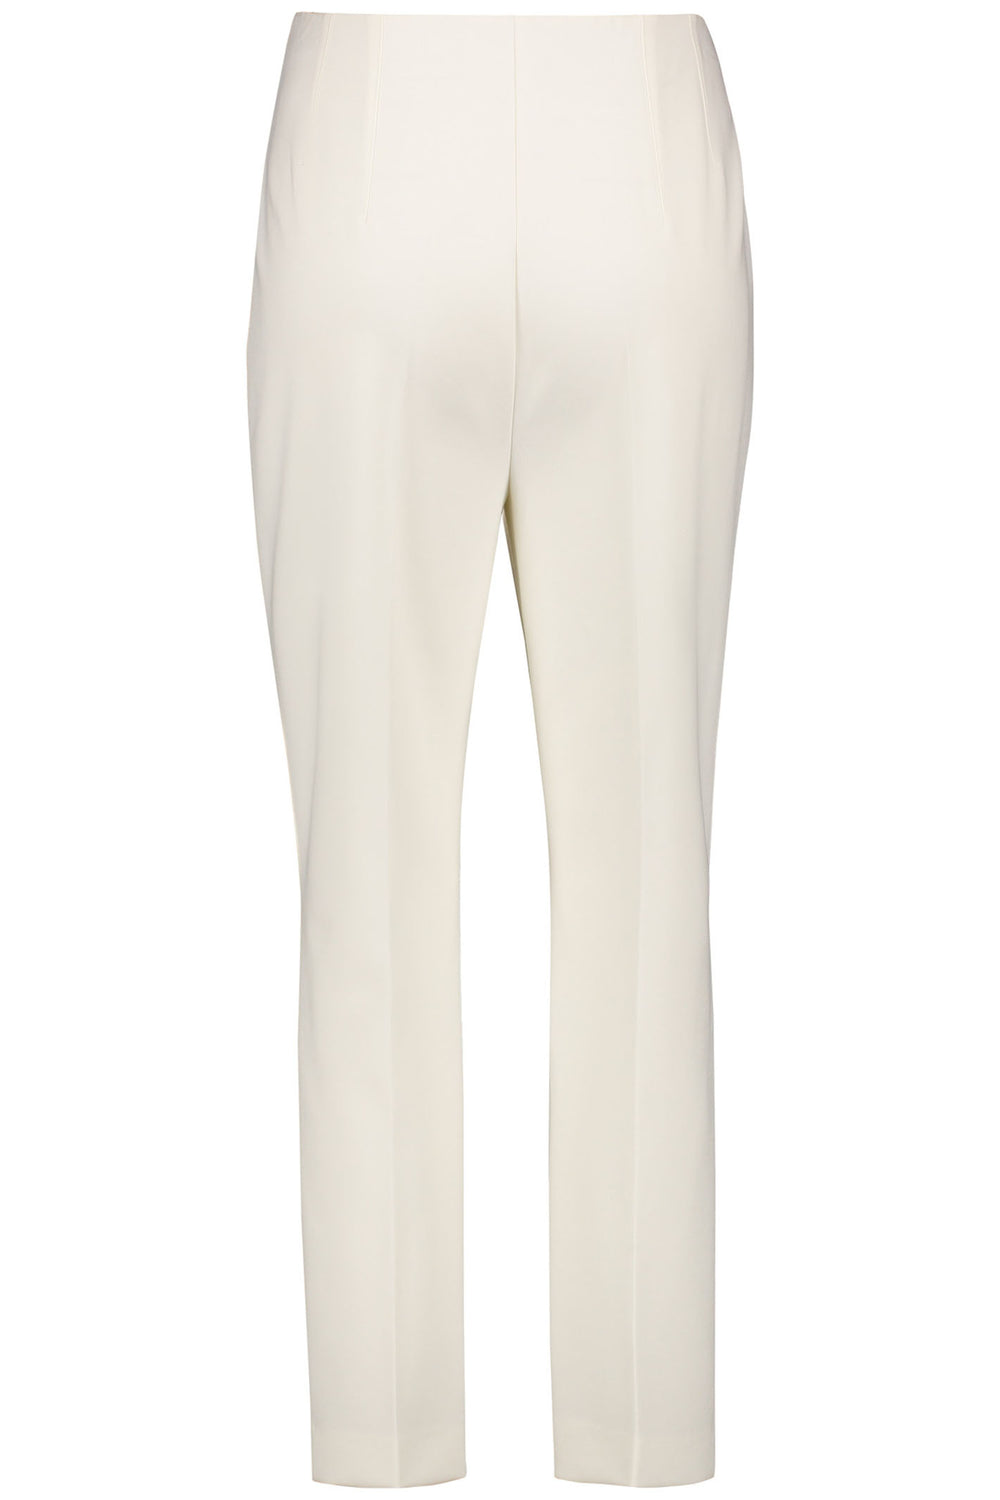 Gerry Weber 320014 Whisper White Straight Leg Trousers - Experience Boutique